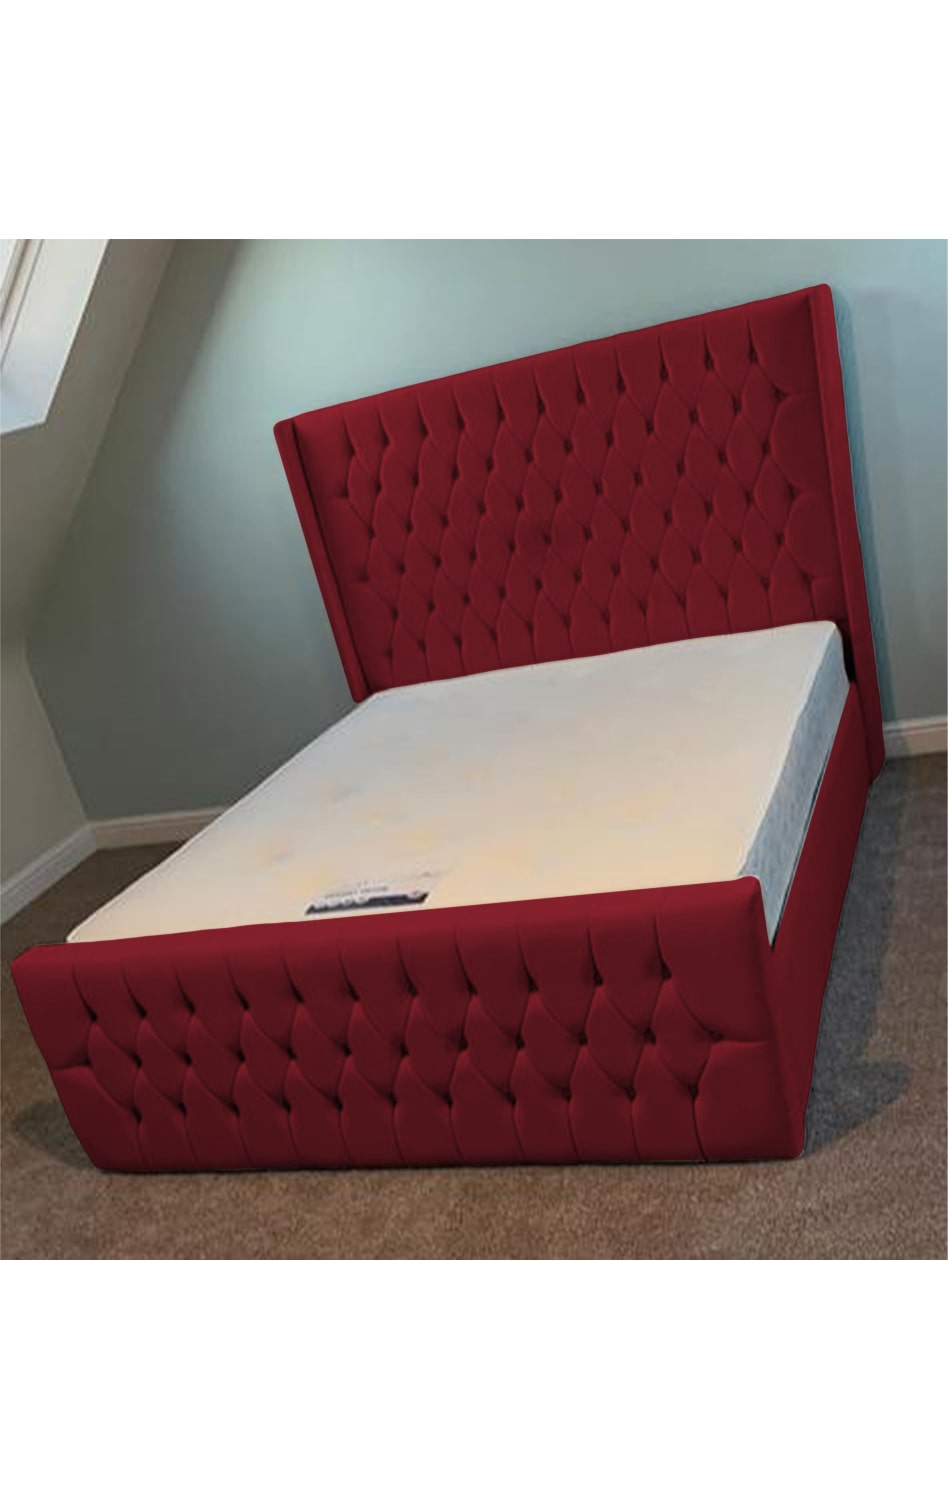 West Wings Upholstered Bed Frame with Ottoman Storage Options Britainsleep